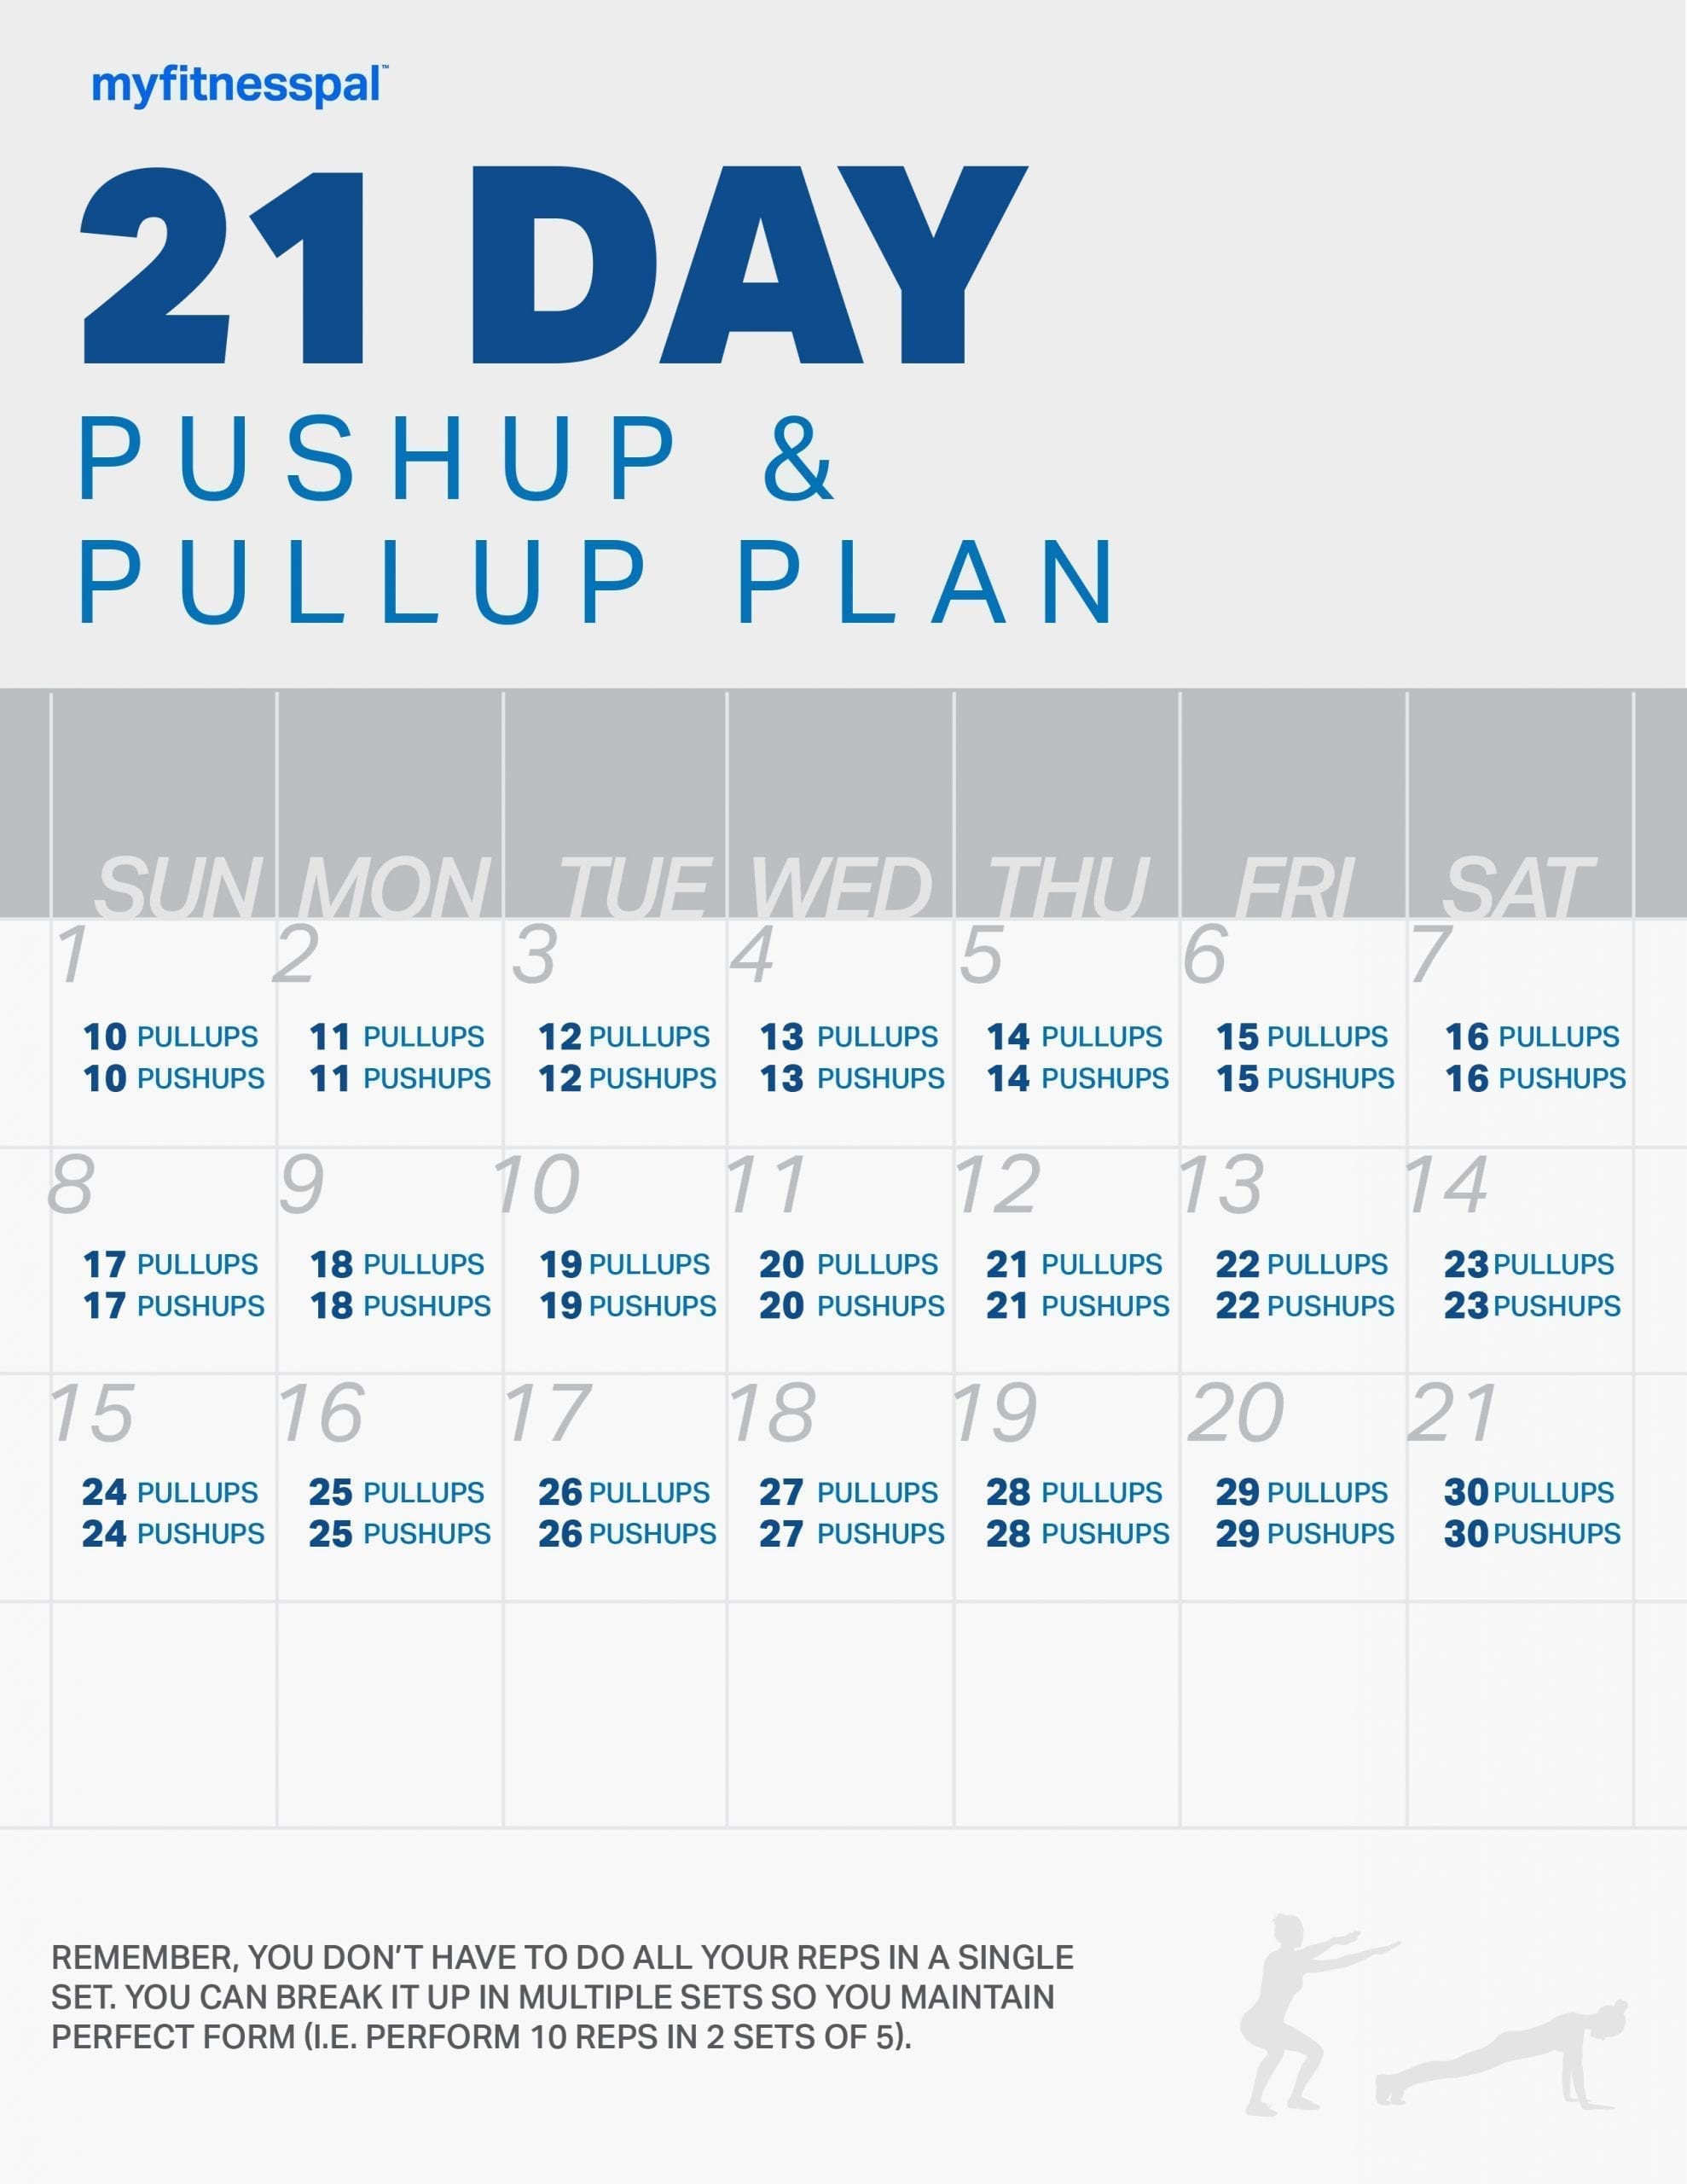 The 21 Day Pushup And Pullup Plan